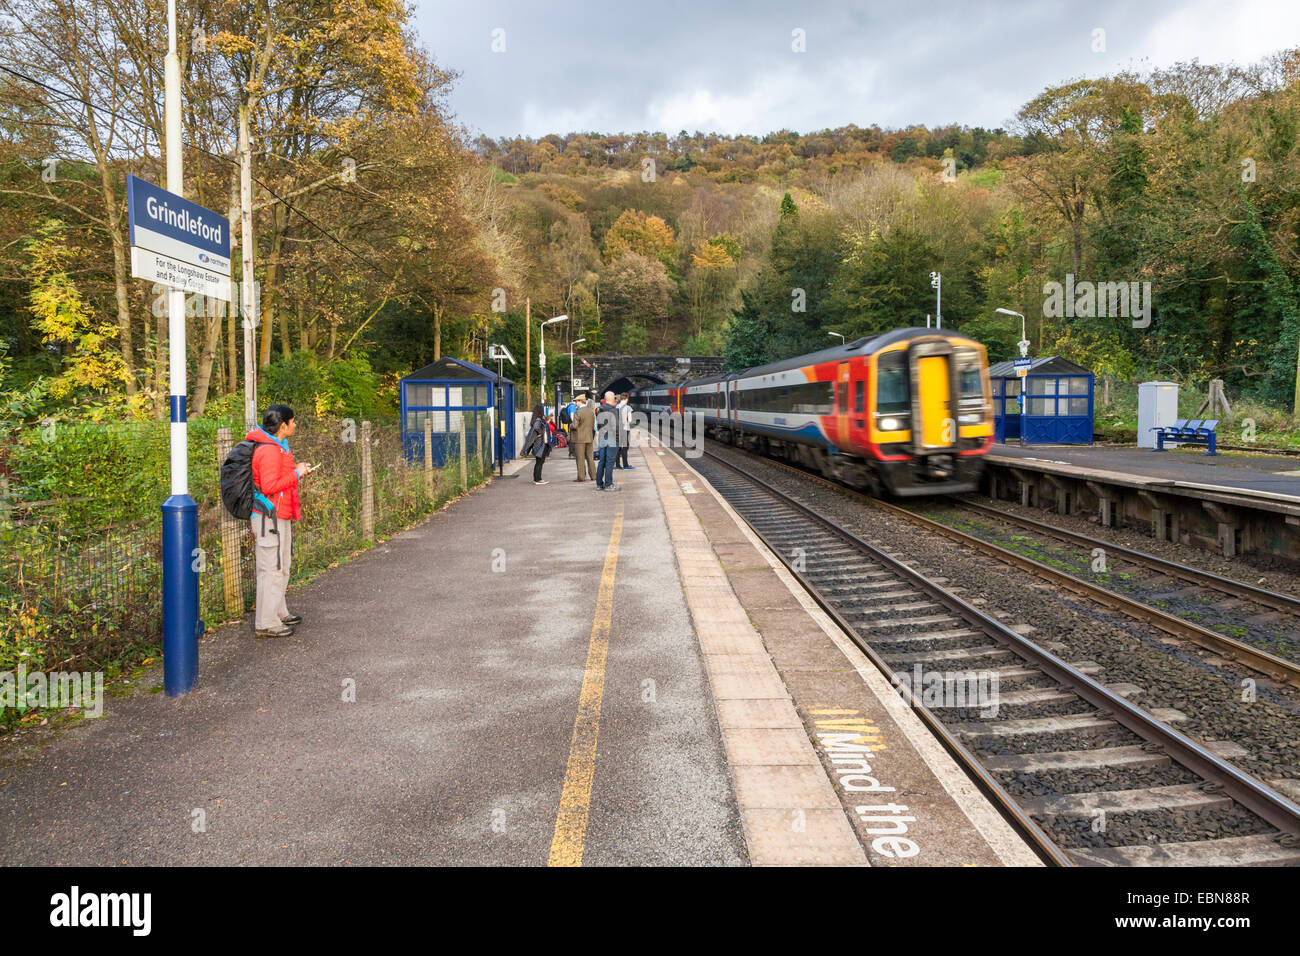 East Midlands Trains train passing through the countryside railway station at Grindleford in the Peak District, Derbyshire, England, UK Stock Photo